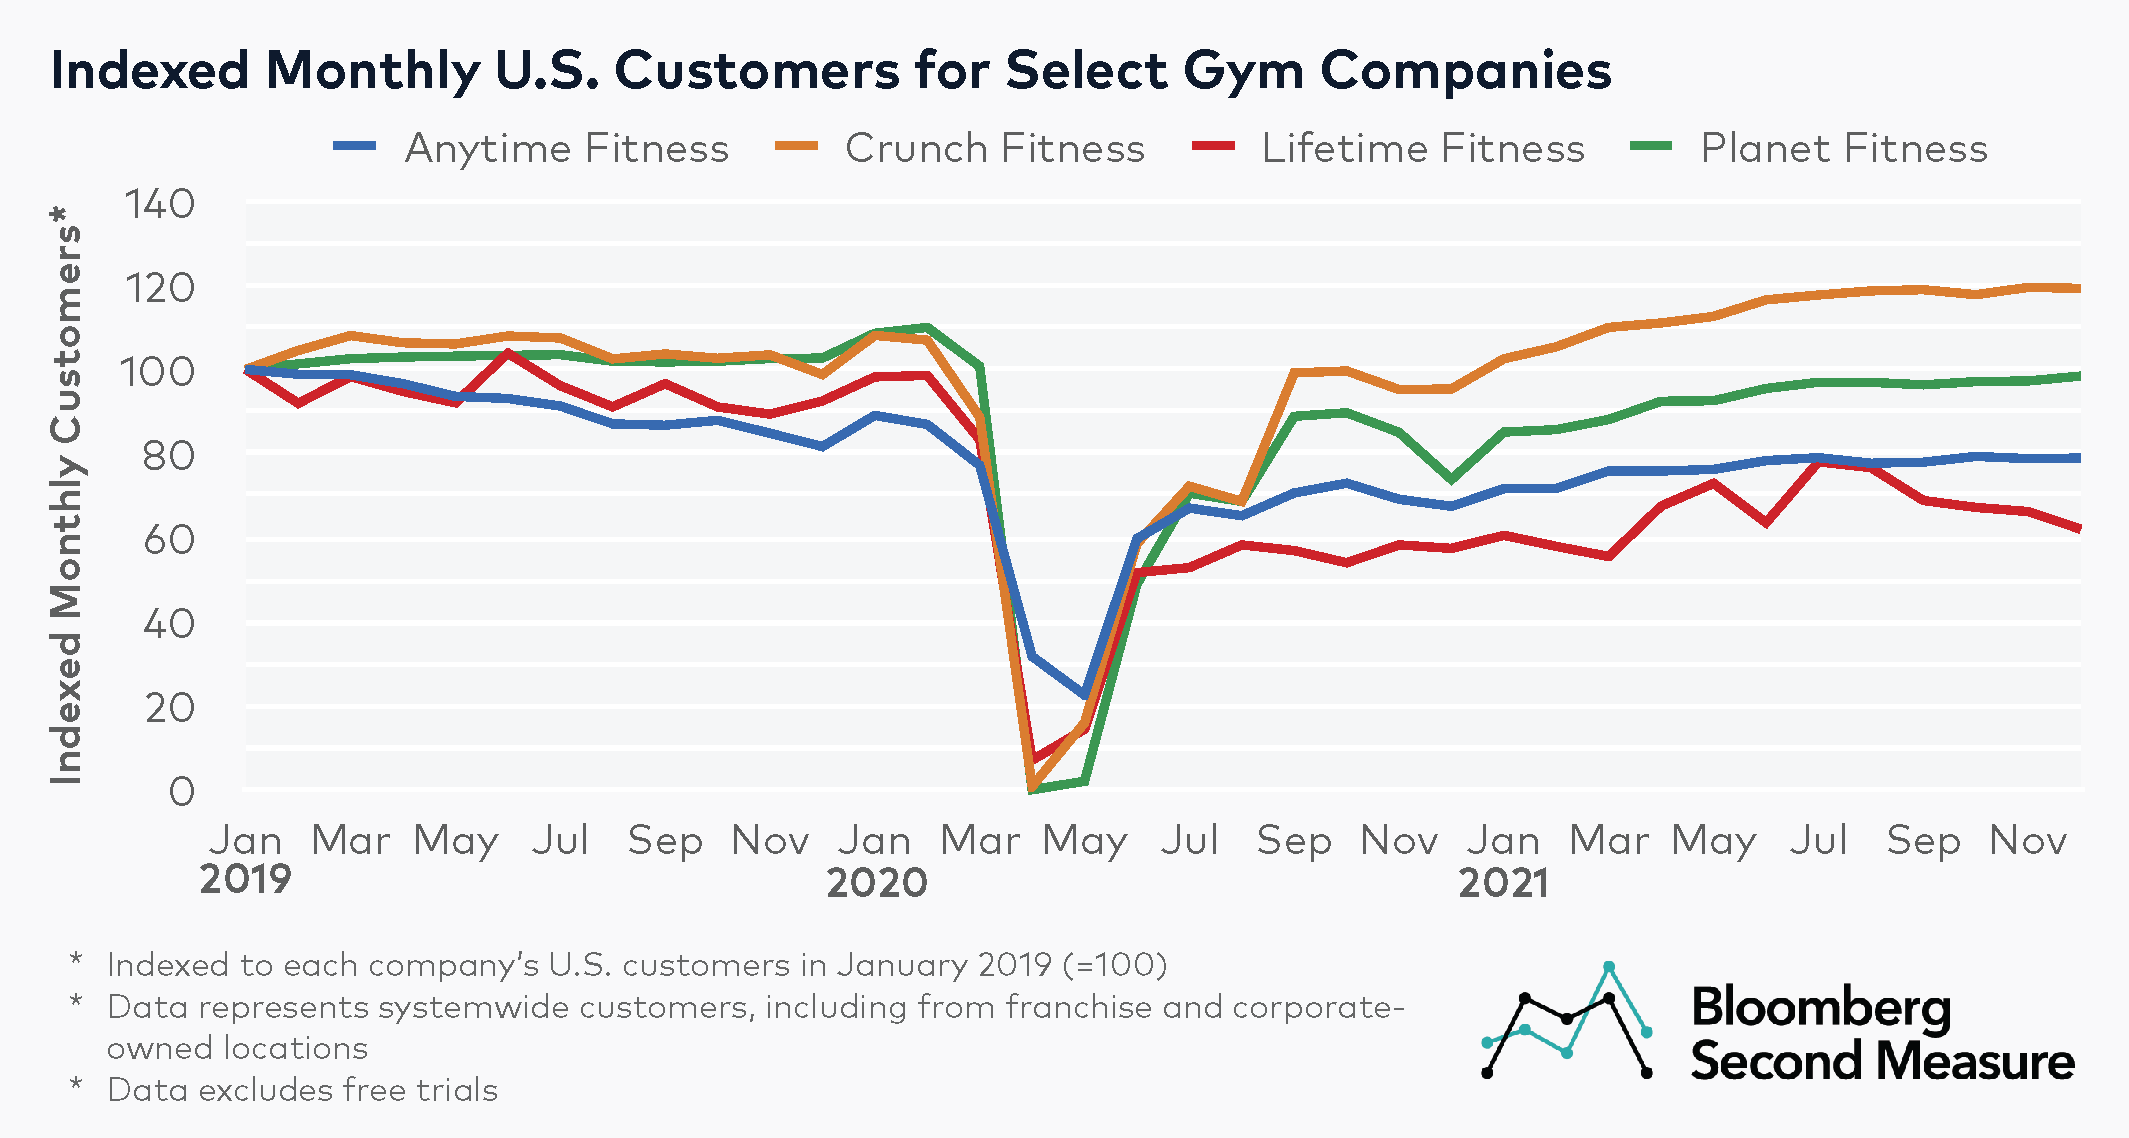 https://secondmeasure.com/wp-content/uploads/2022/02/1-Customer-growth-at-gym-companies-Crunch-Planet-Fitness-NYSE-PLNT-Life-Time-Fitness-NYSE-LTH-Anytime-Fitness-.png